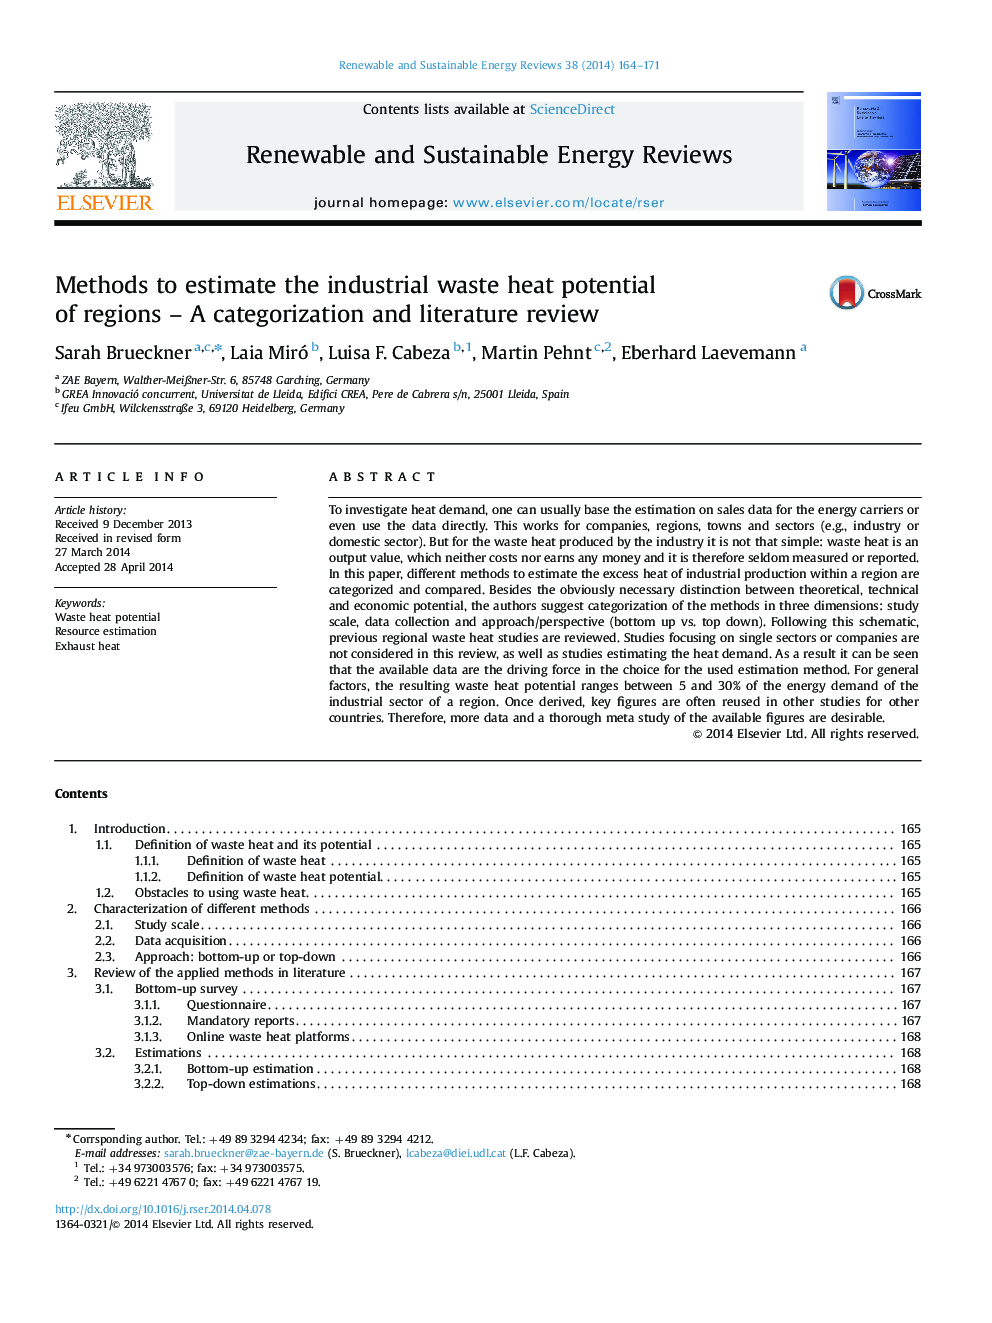 Methods to estimate the industrial waste heat potential of regions - A categorization and literature review